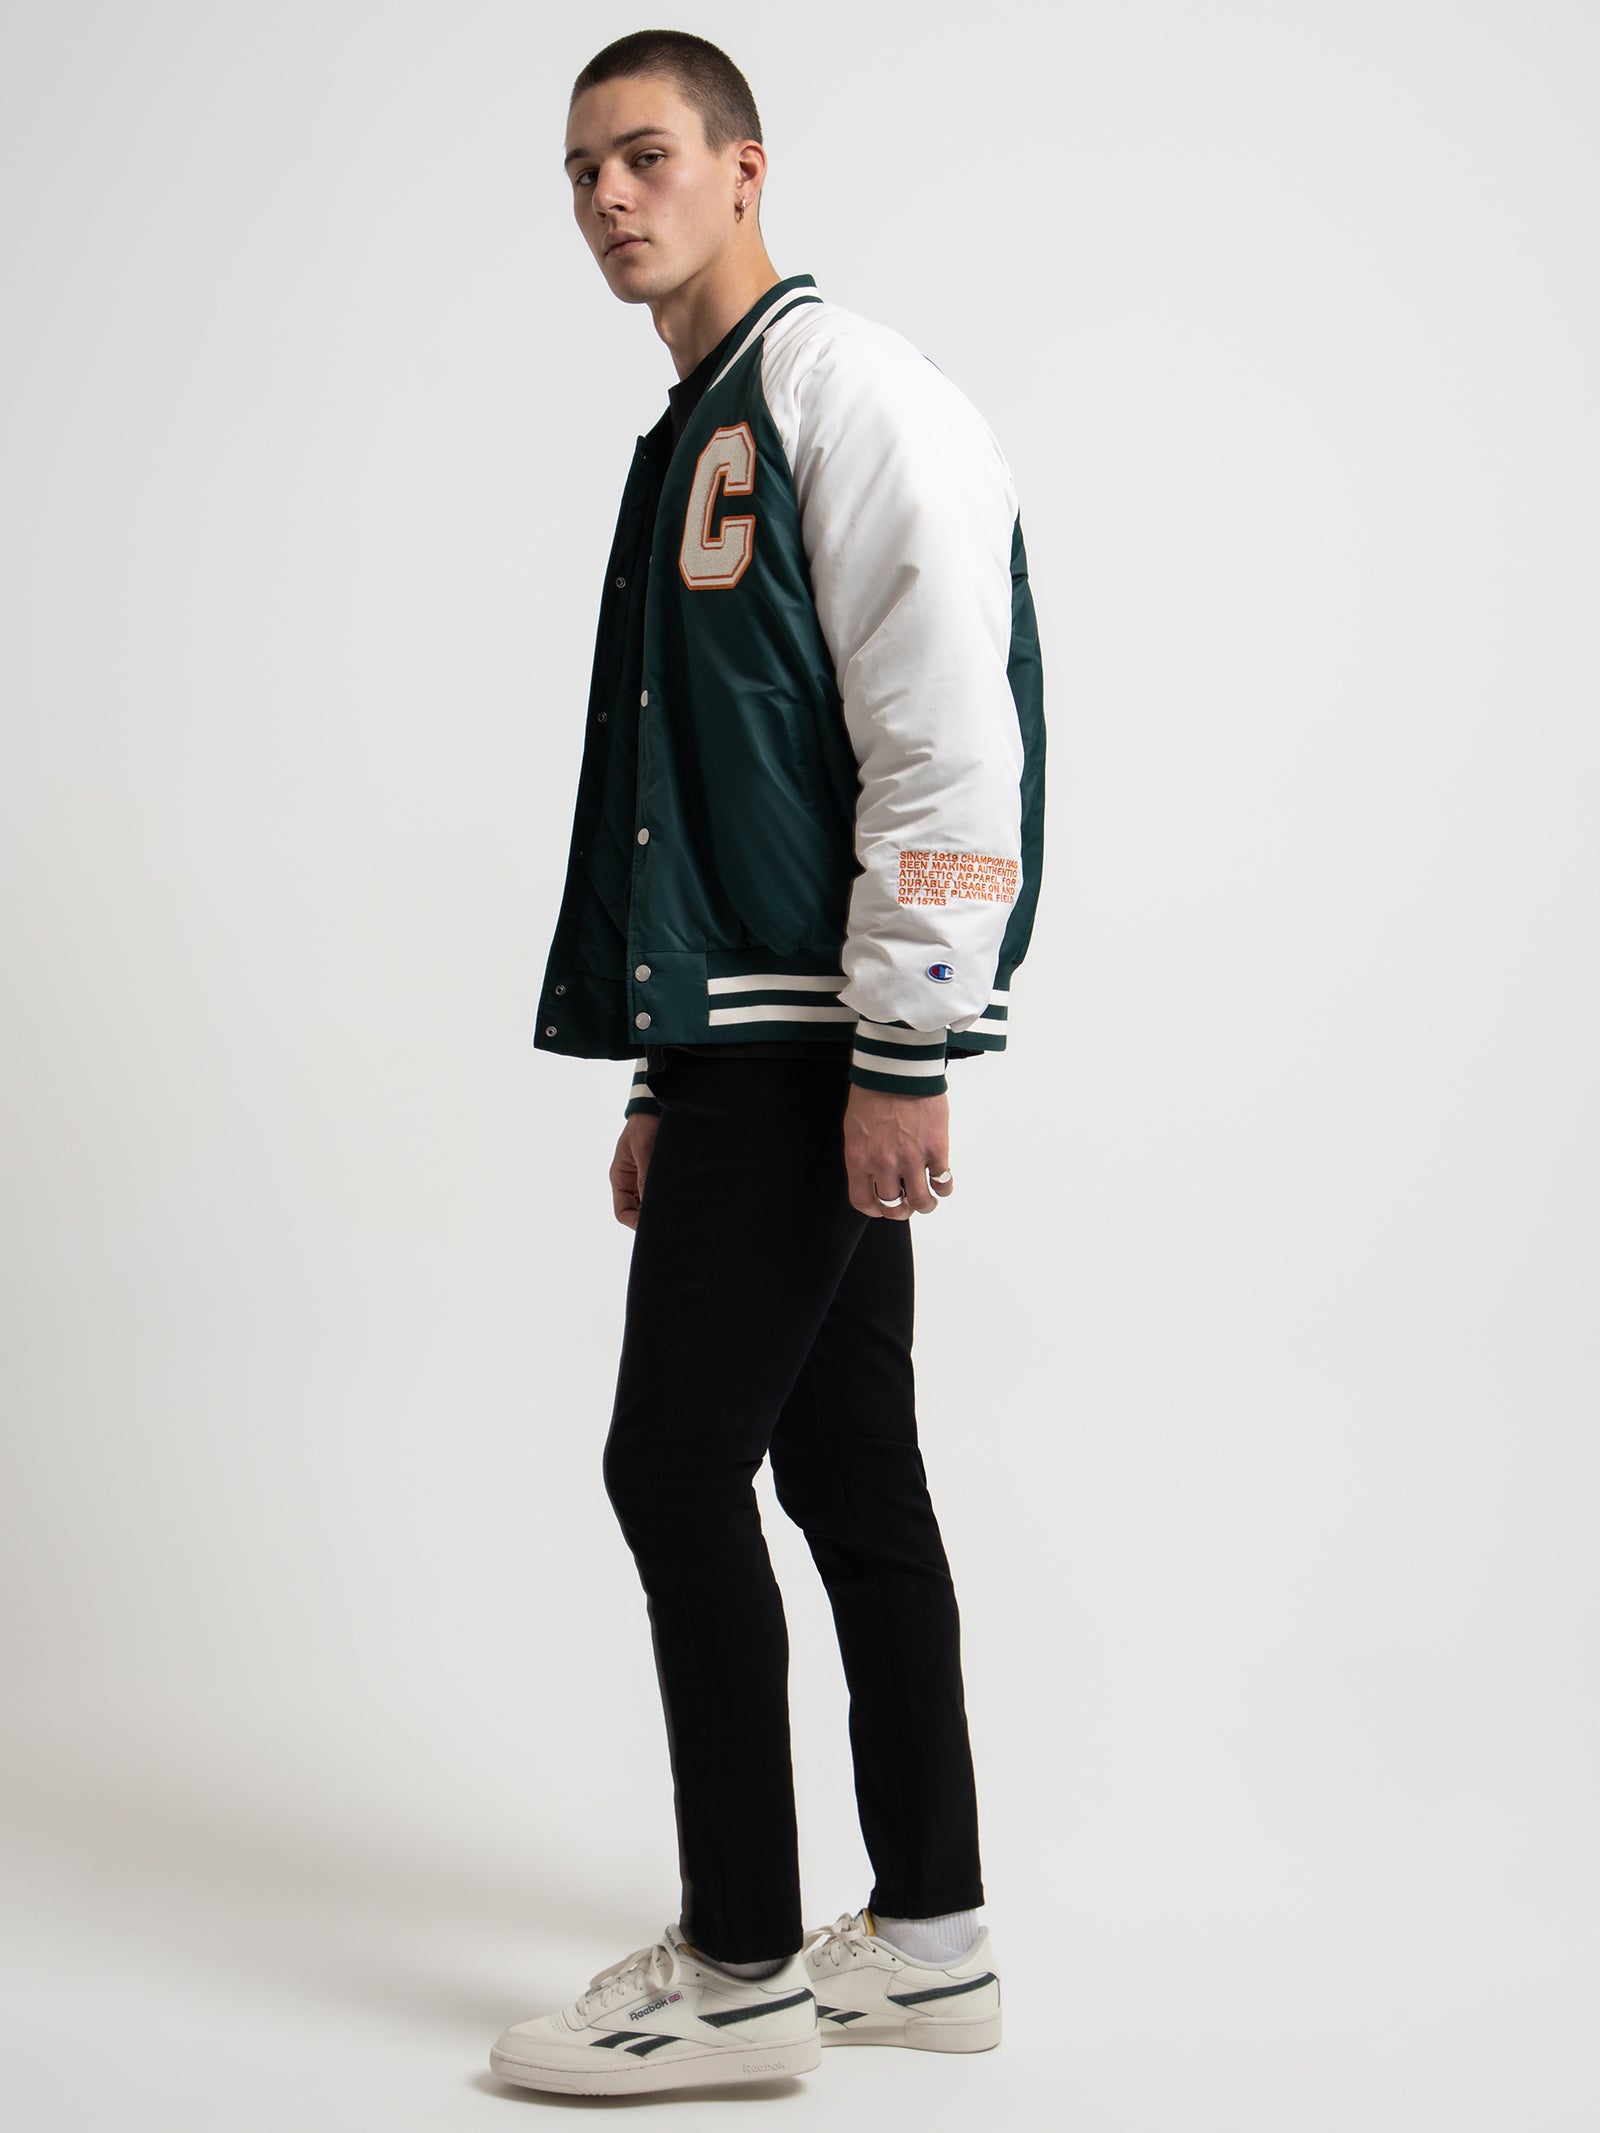 Re:Bound Clubhouse Varsity Jacket in Midfield Green - Glue Store